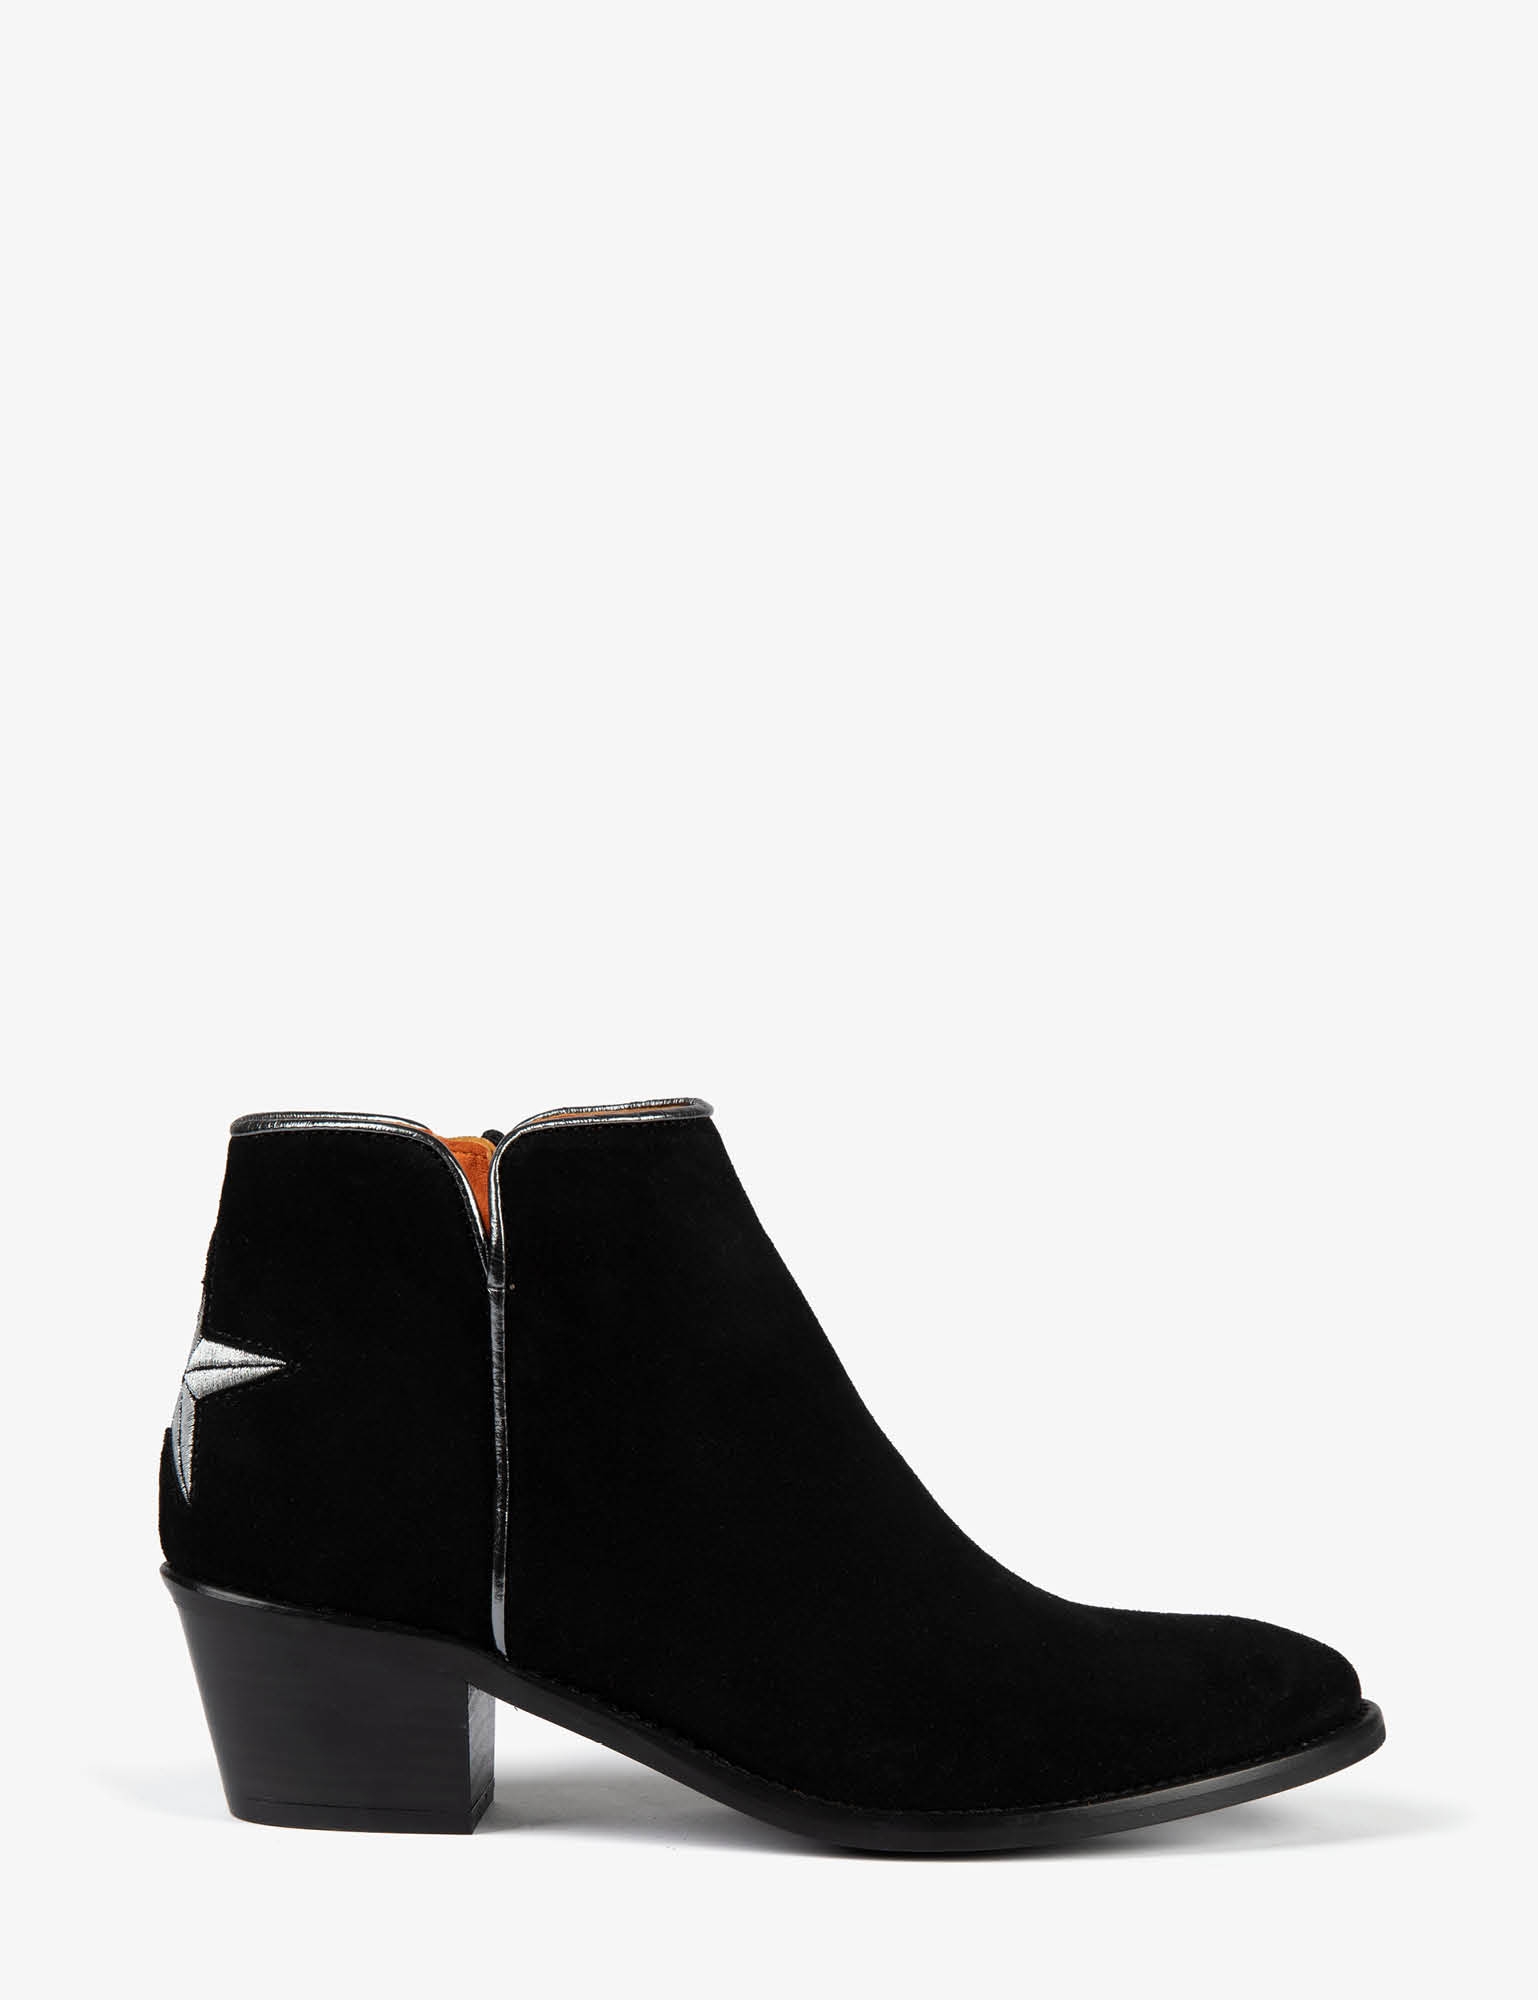 Paco Star Gazer Leather Boot - Black | Women's Boot | Penelope Chilvers